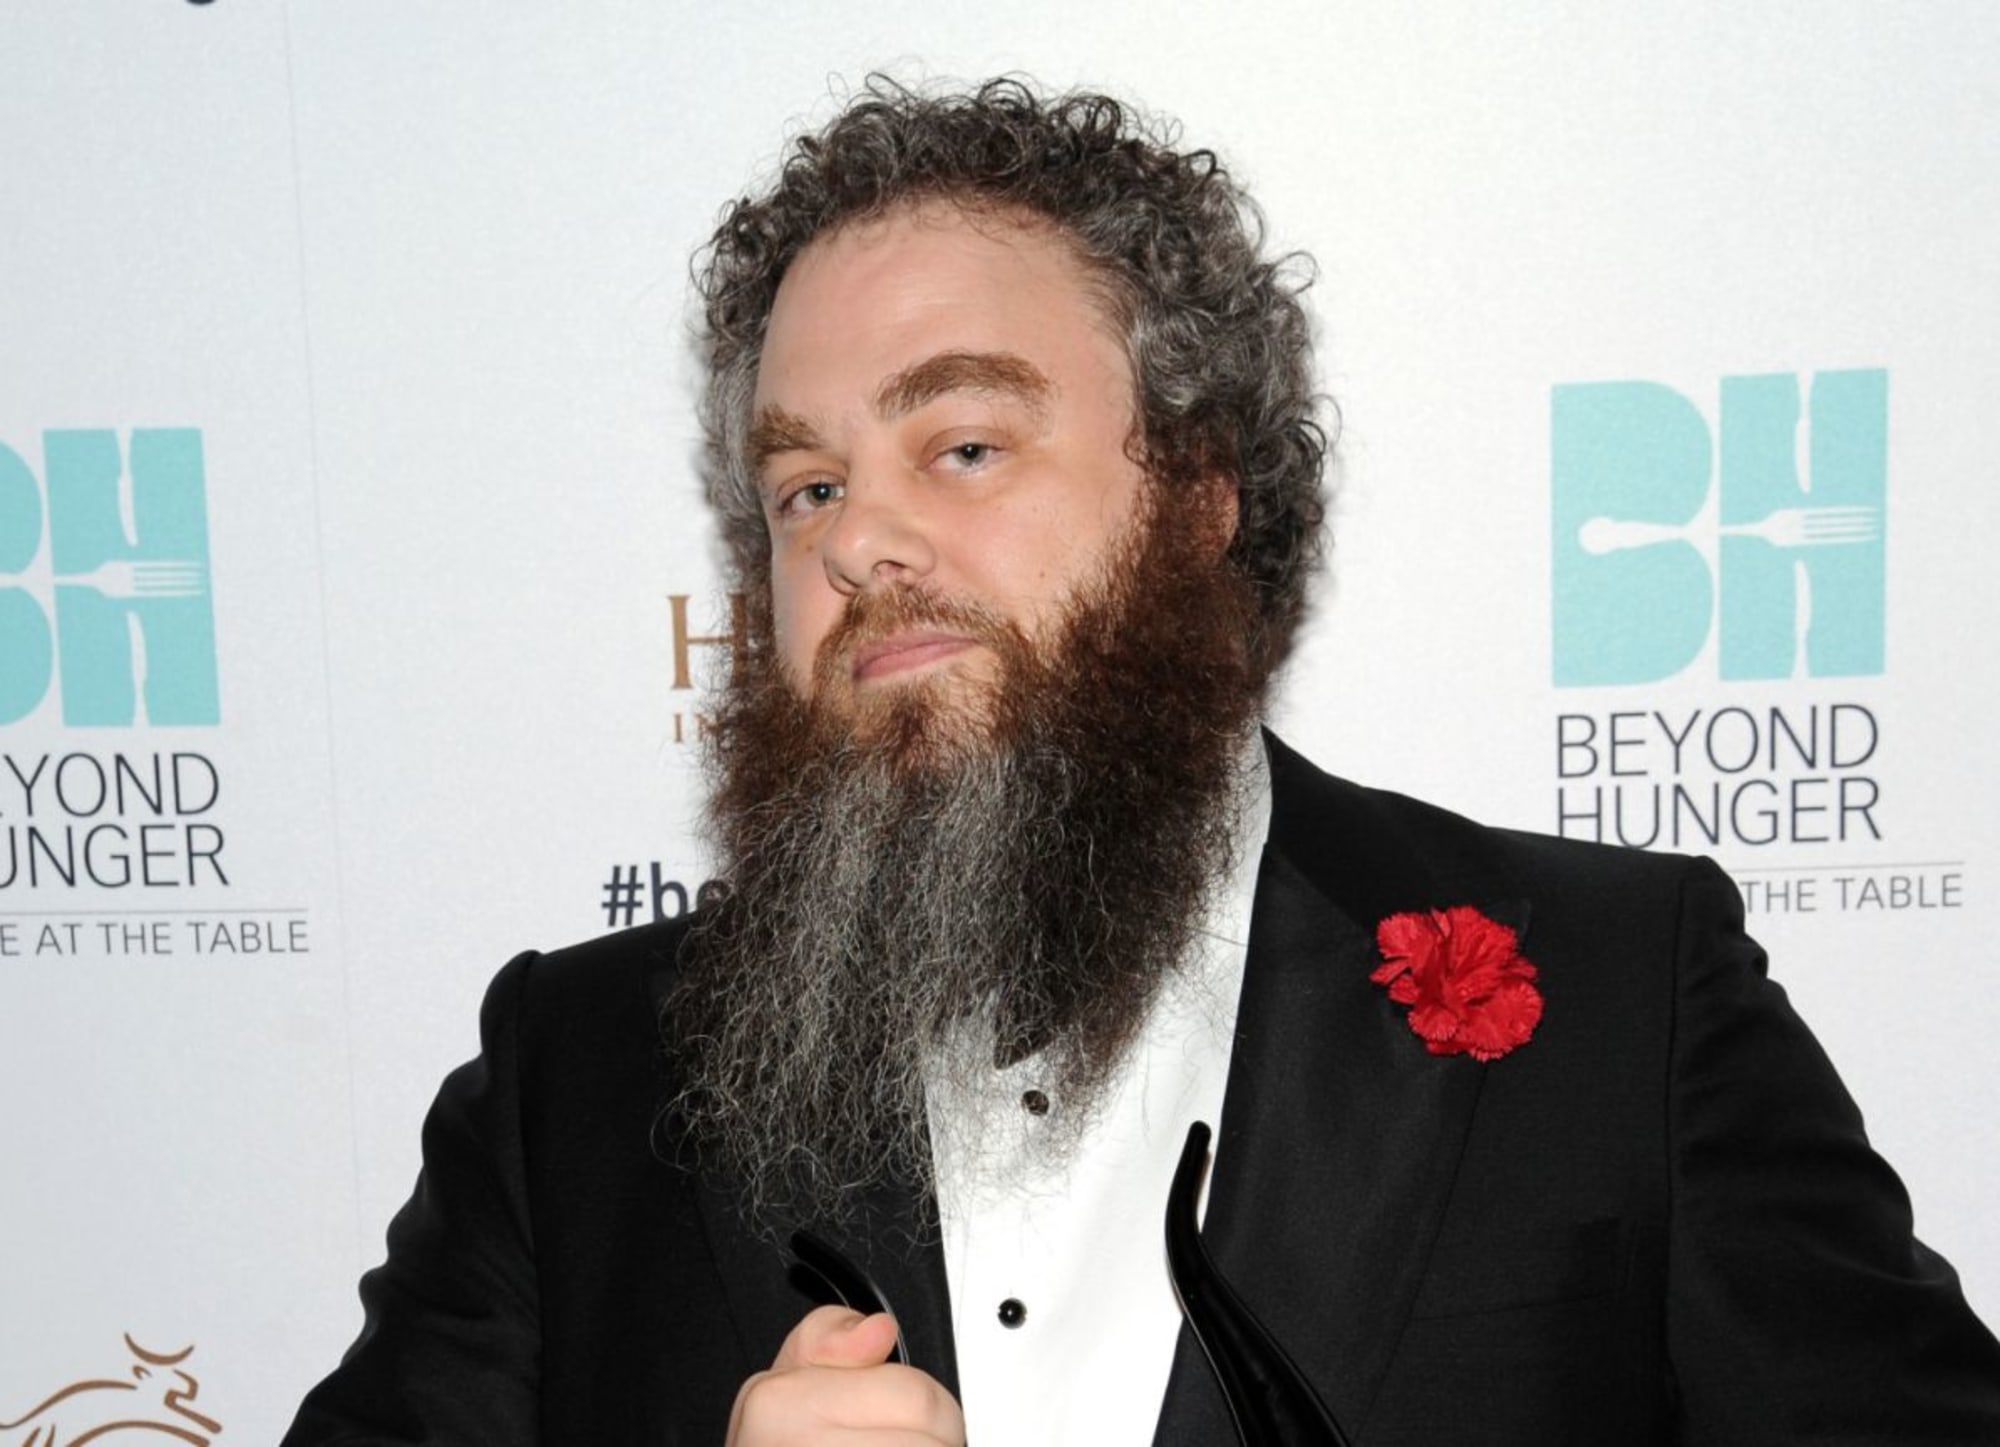 Patrick Rothfuss: I feel bad about not releasing The Doors of Stone  charity chapter